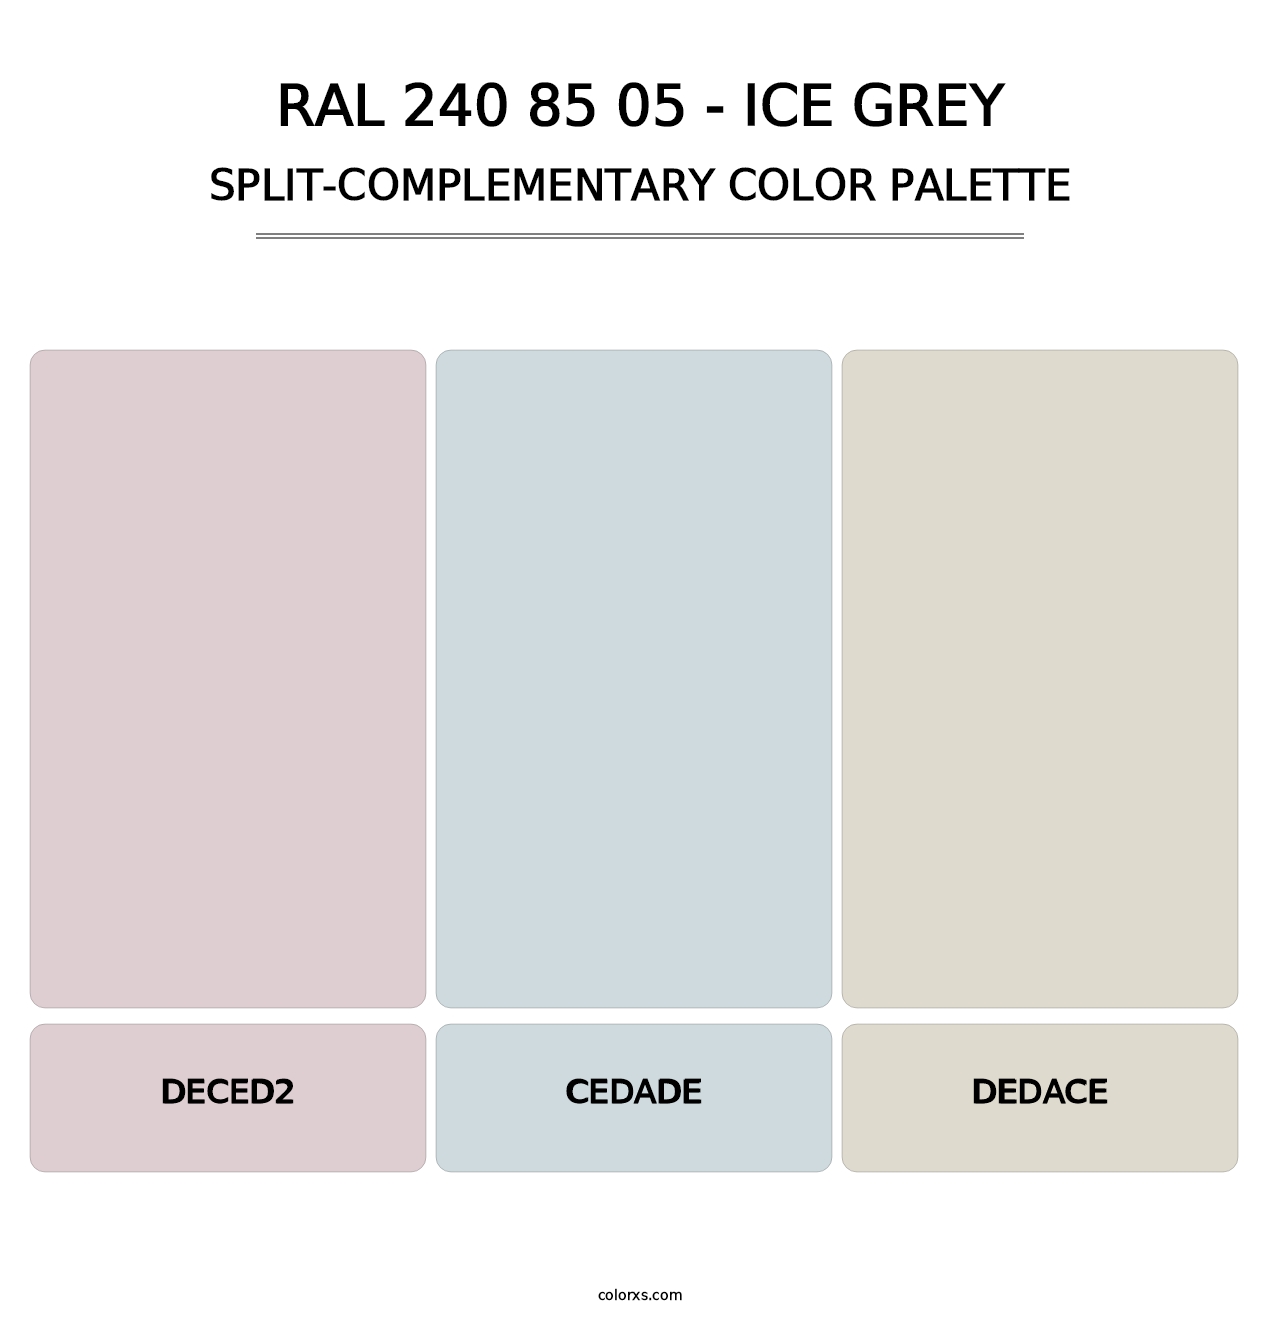 RAL 240 85 05 - Ice Grey - Split-Complementary Color Palette